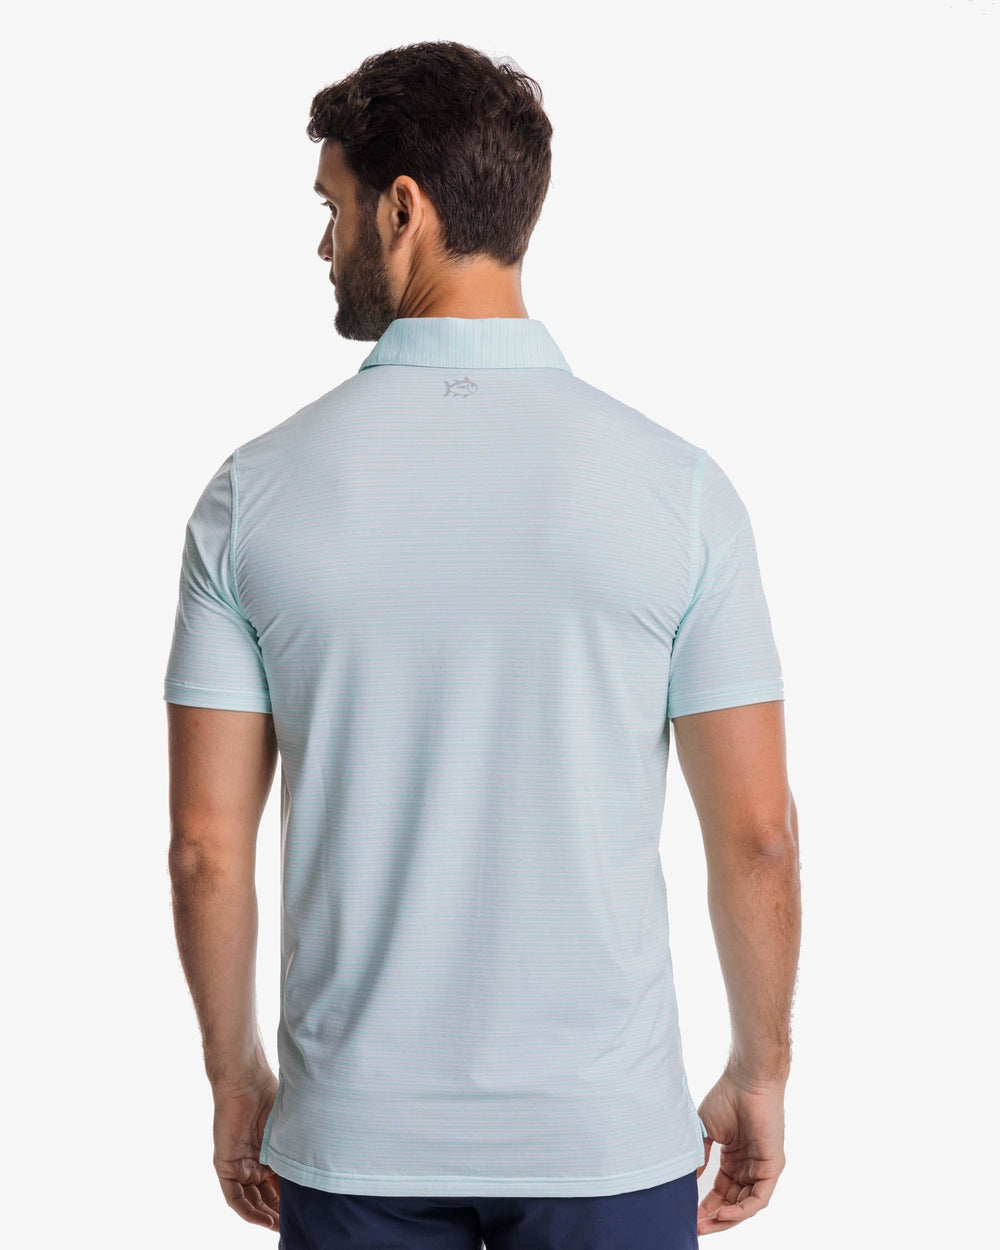 The back view of the Southern Tide brrr-eeze Millwood Stripe Performance Polo Shirt by Southern Tide - Baltic Teal